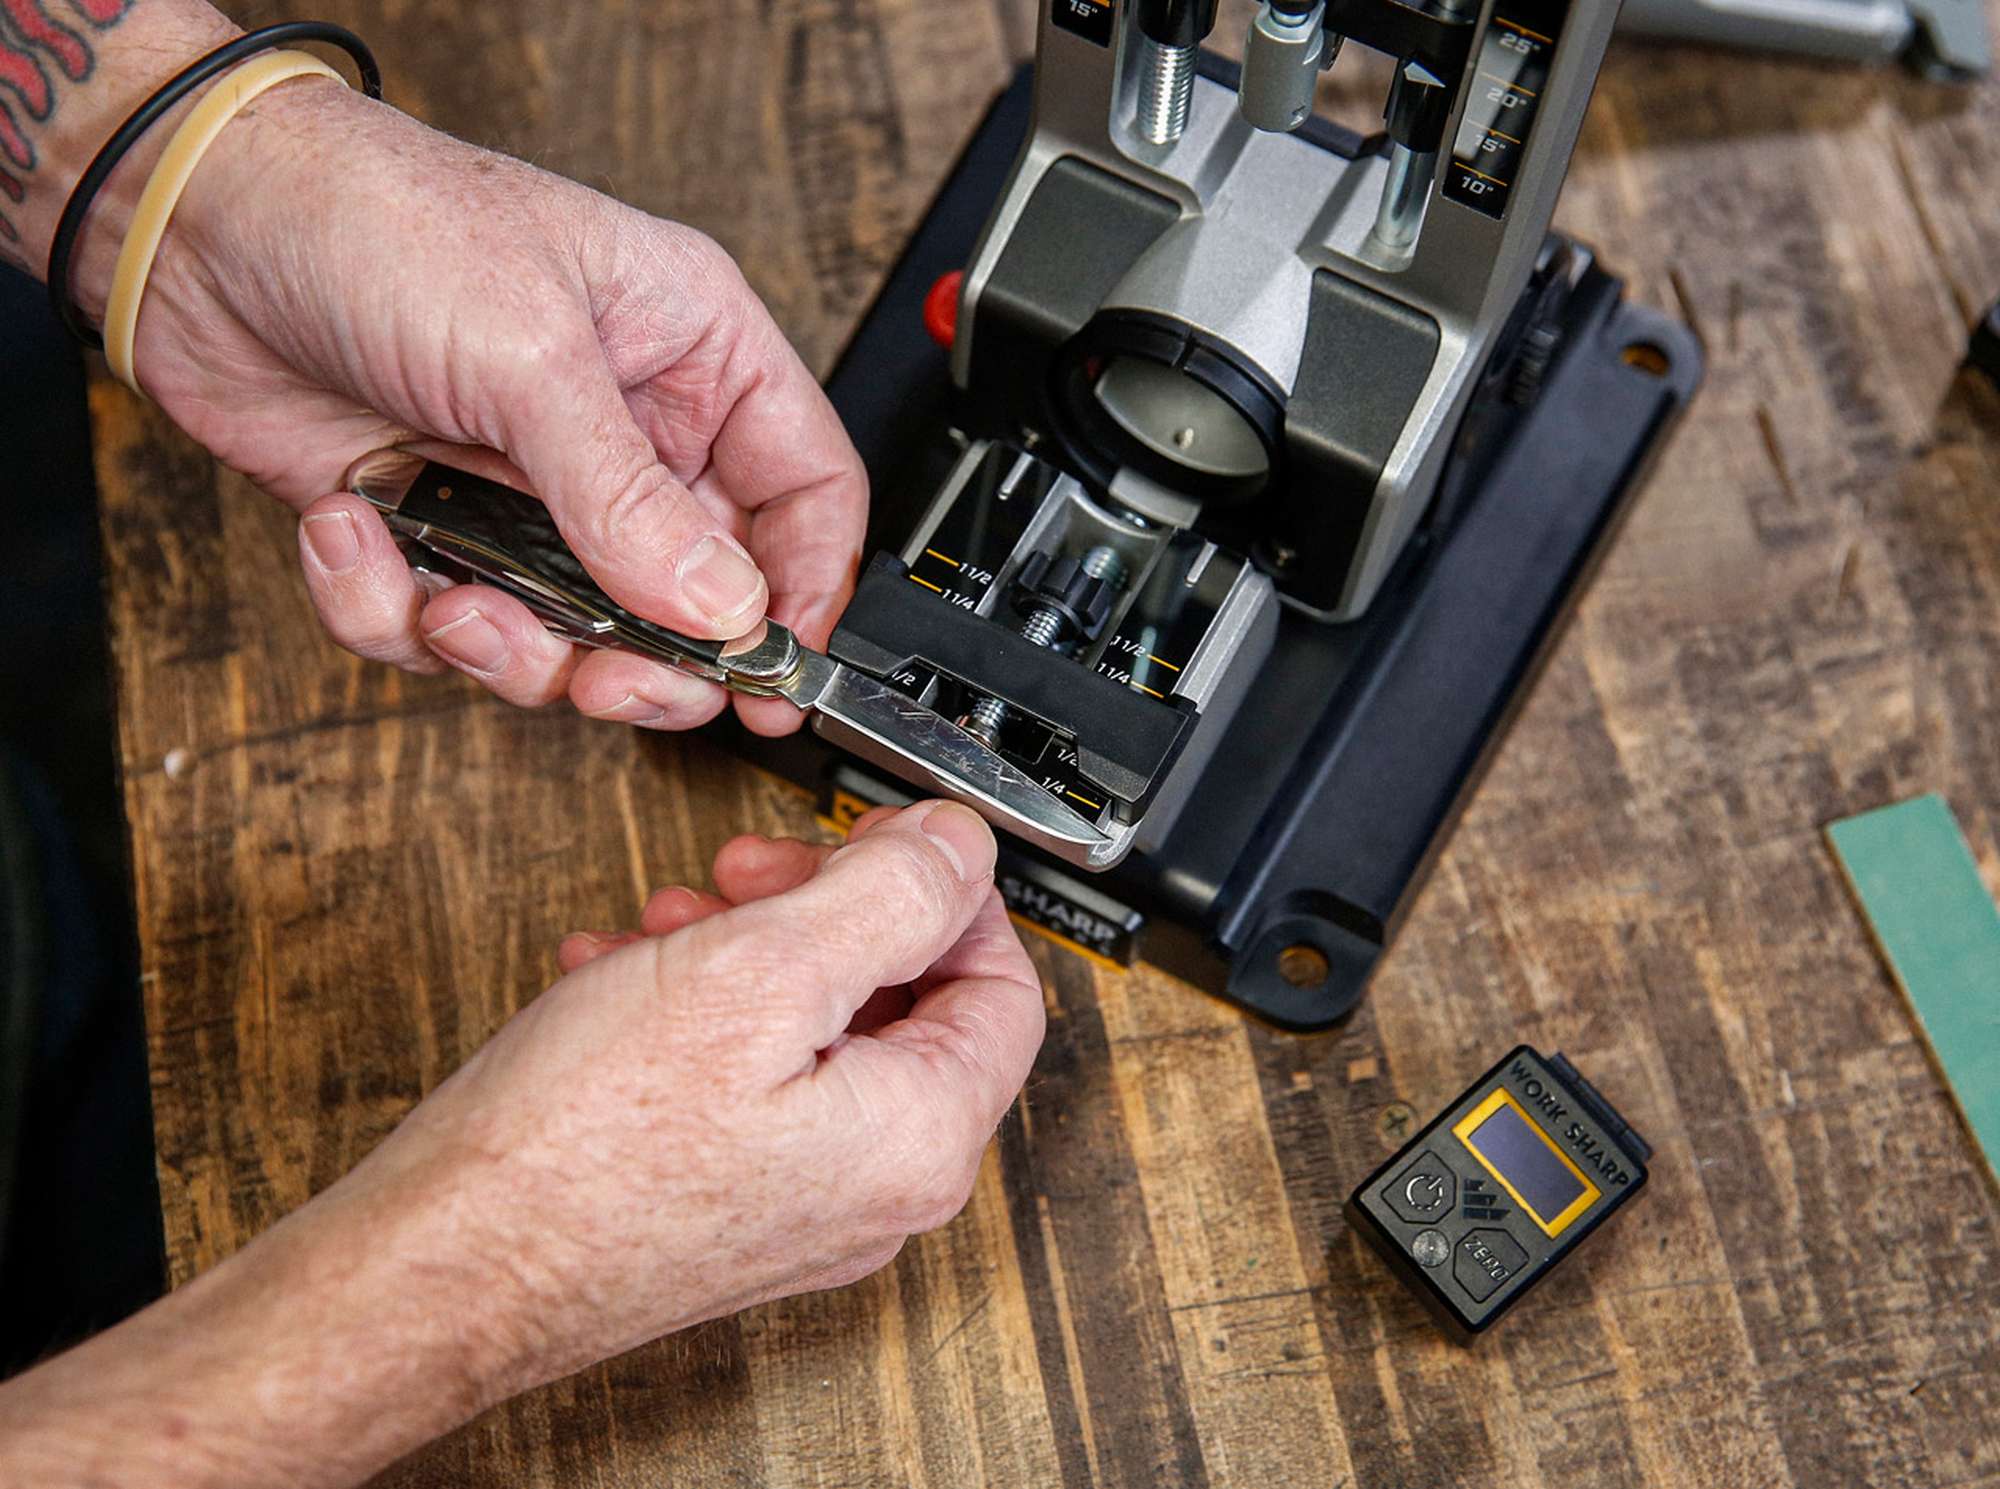 This is the Professional Precision Adjust Knife Sharpener 